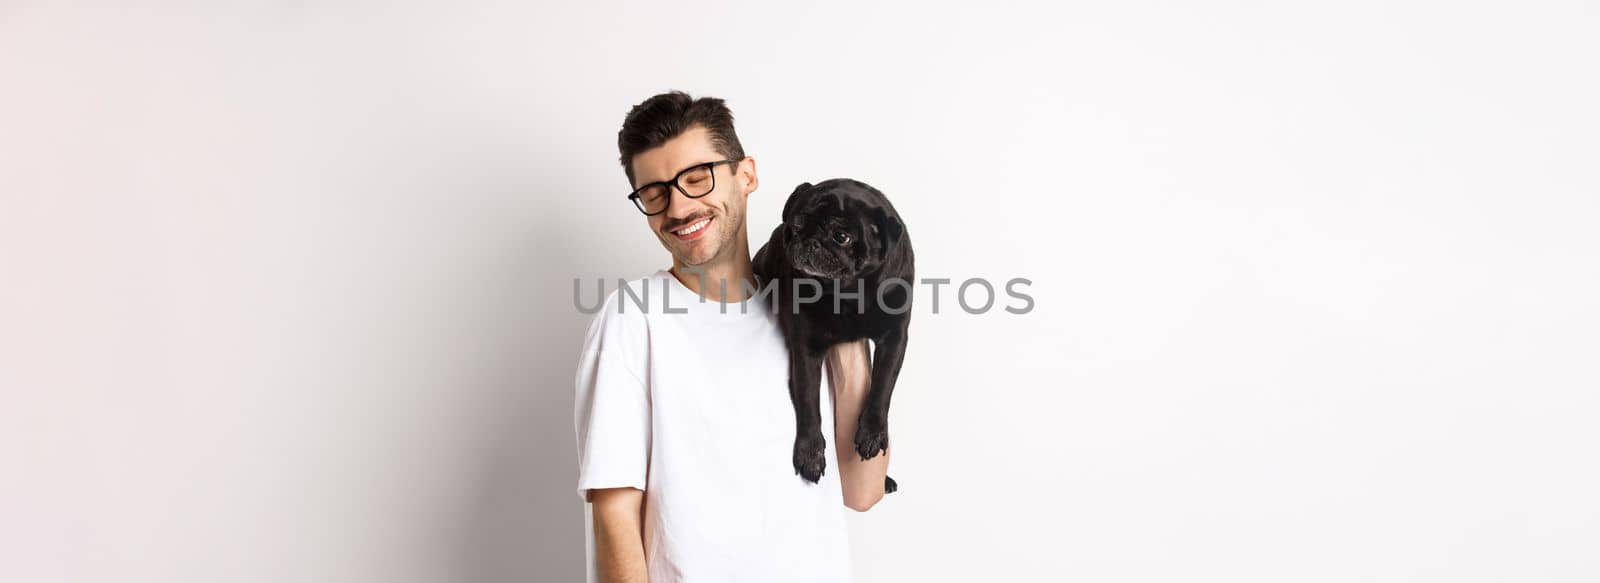 Happy man in love with dog, holding puppy on shoulder and smiling, standing over white background.